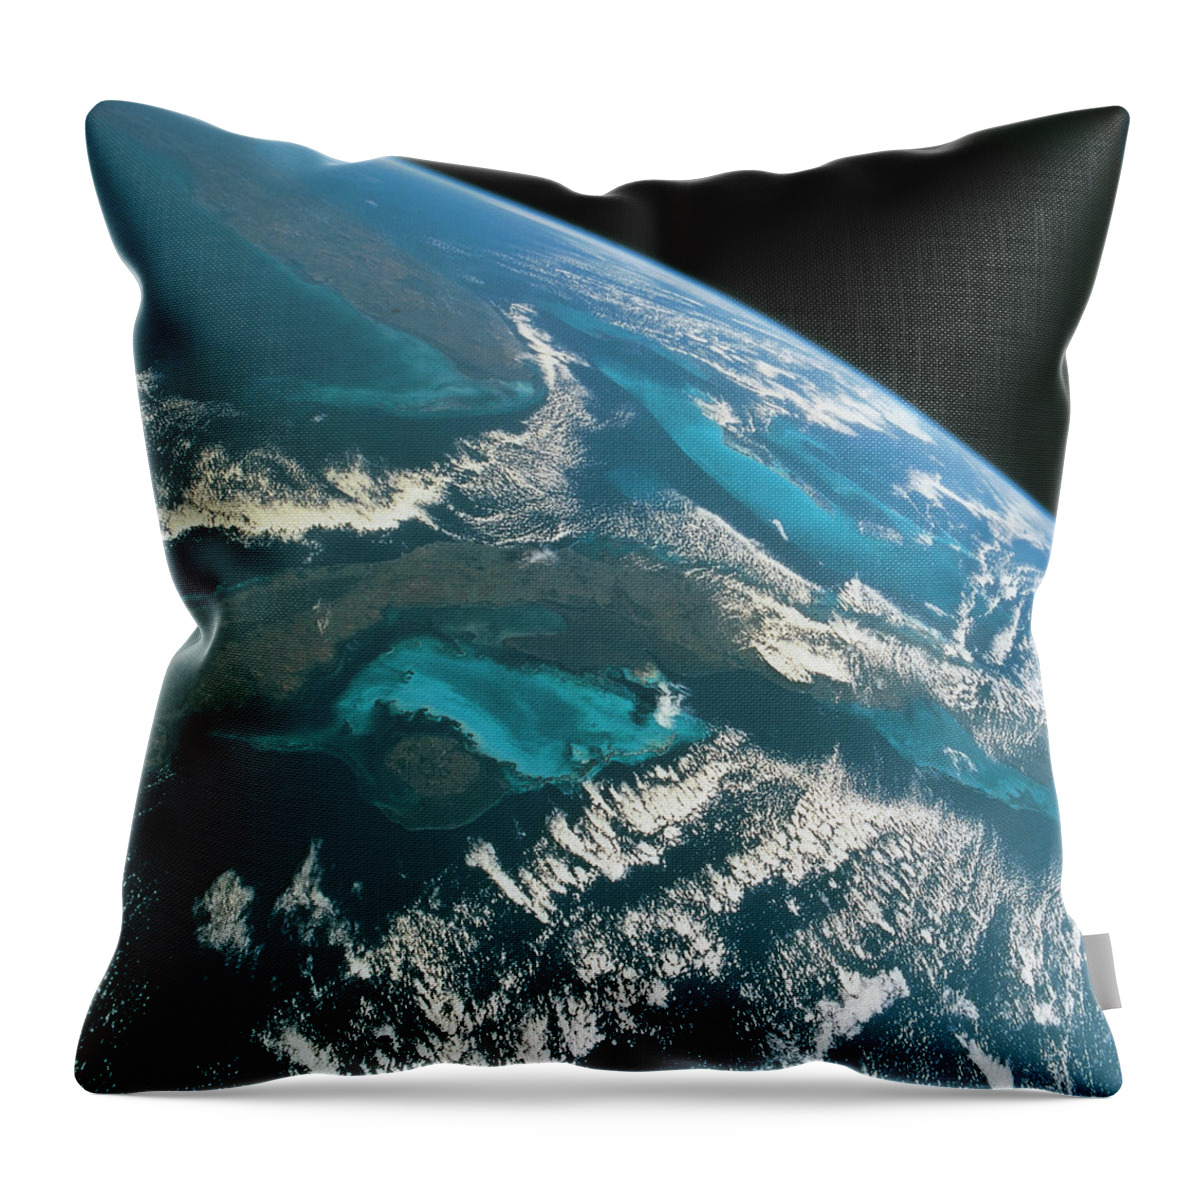 Galaxy Throw Pillow featuring the photograph View From Space Of A Part Of A Planet by Stockbyte